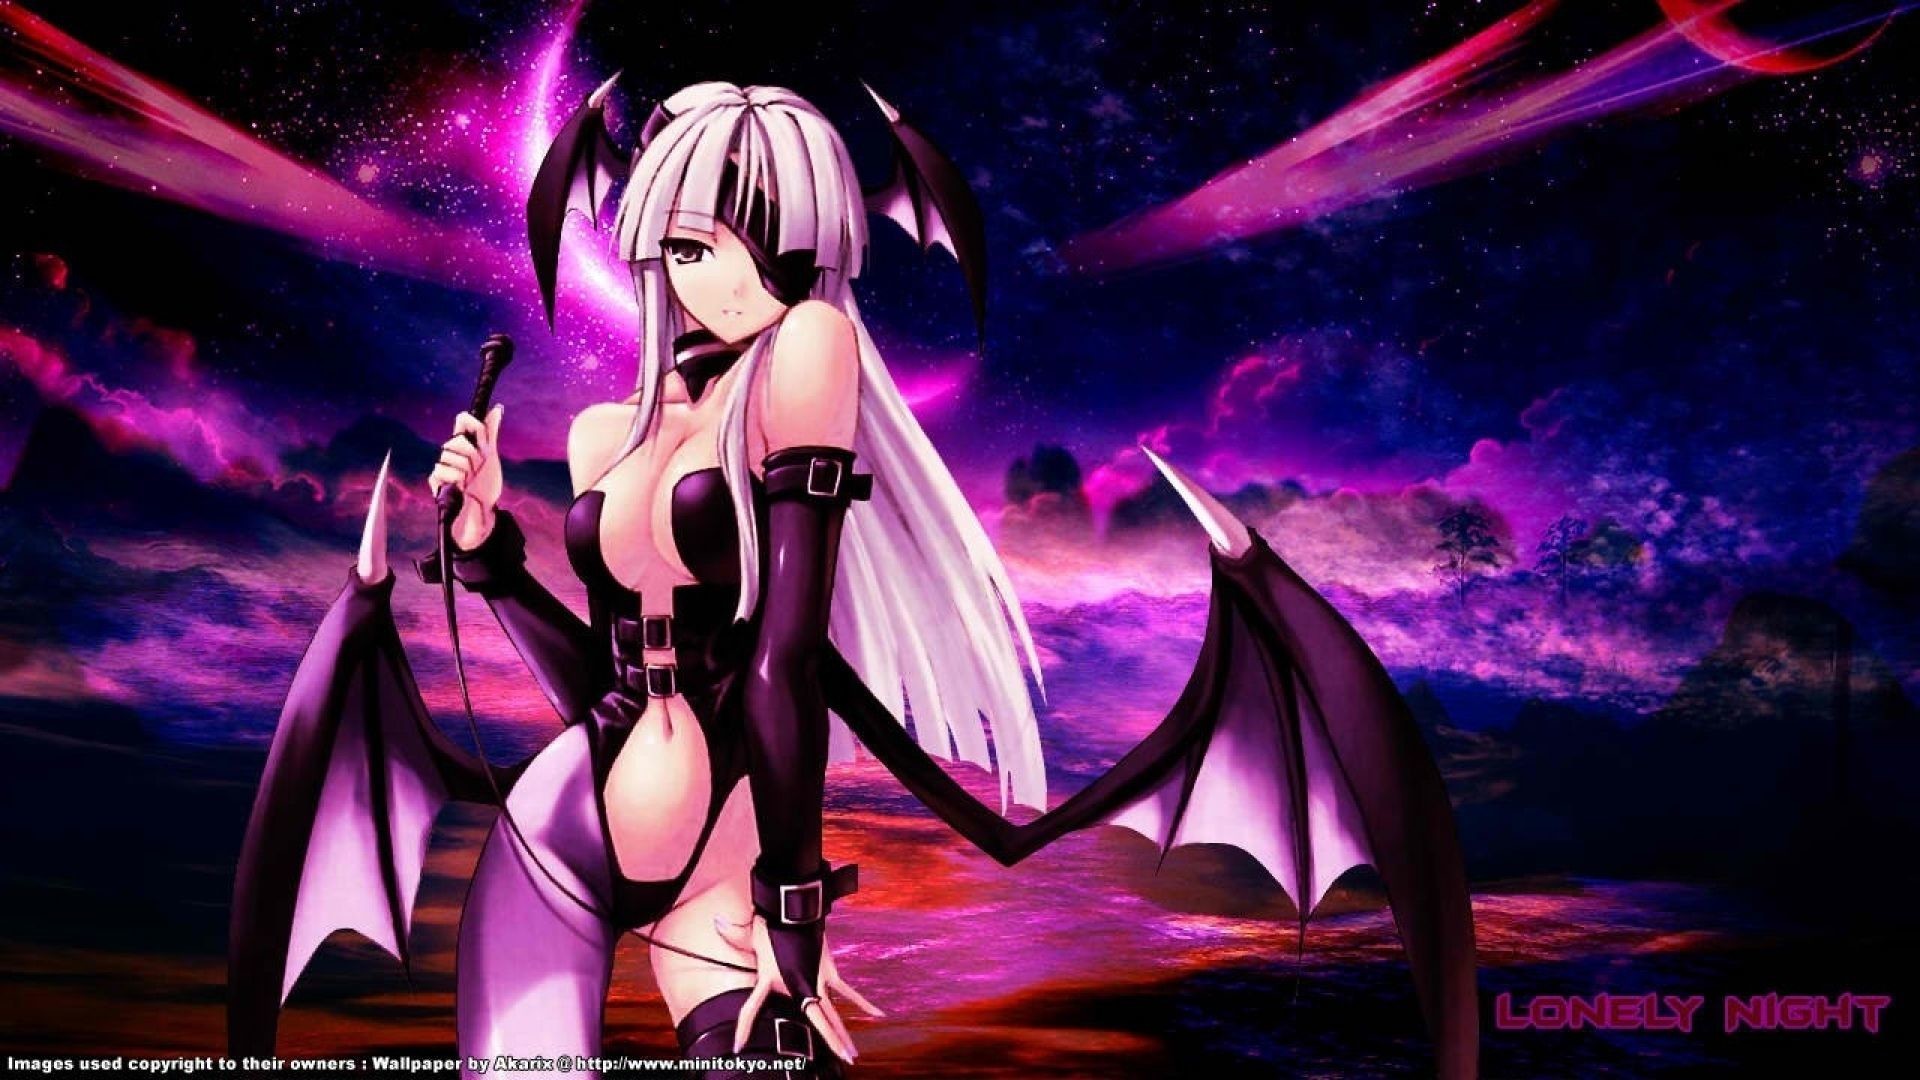 Succubus - Other & Anime Background Wallpapers on Desktop Nexus (Image  1769997)